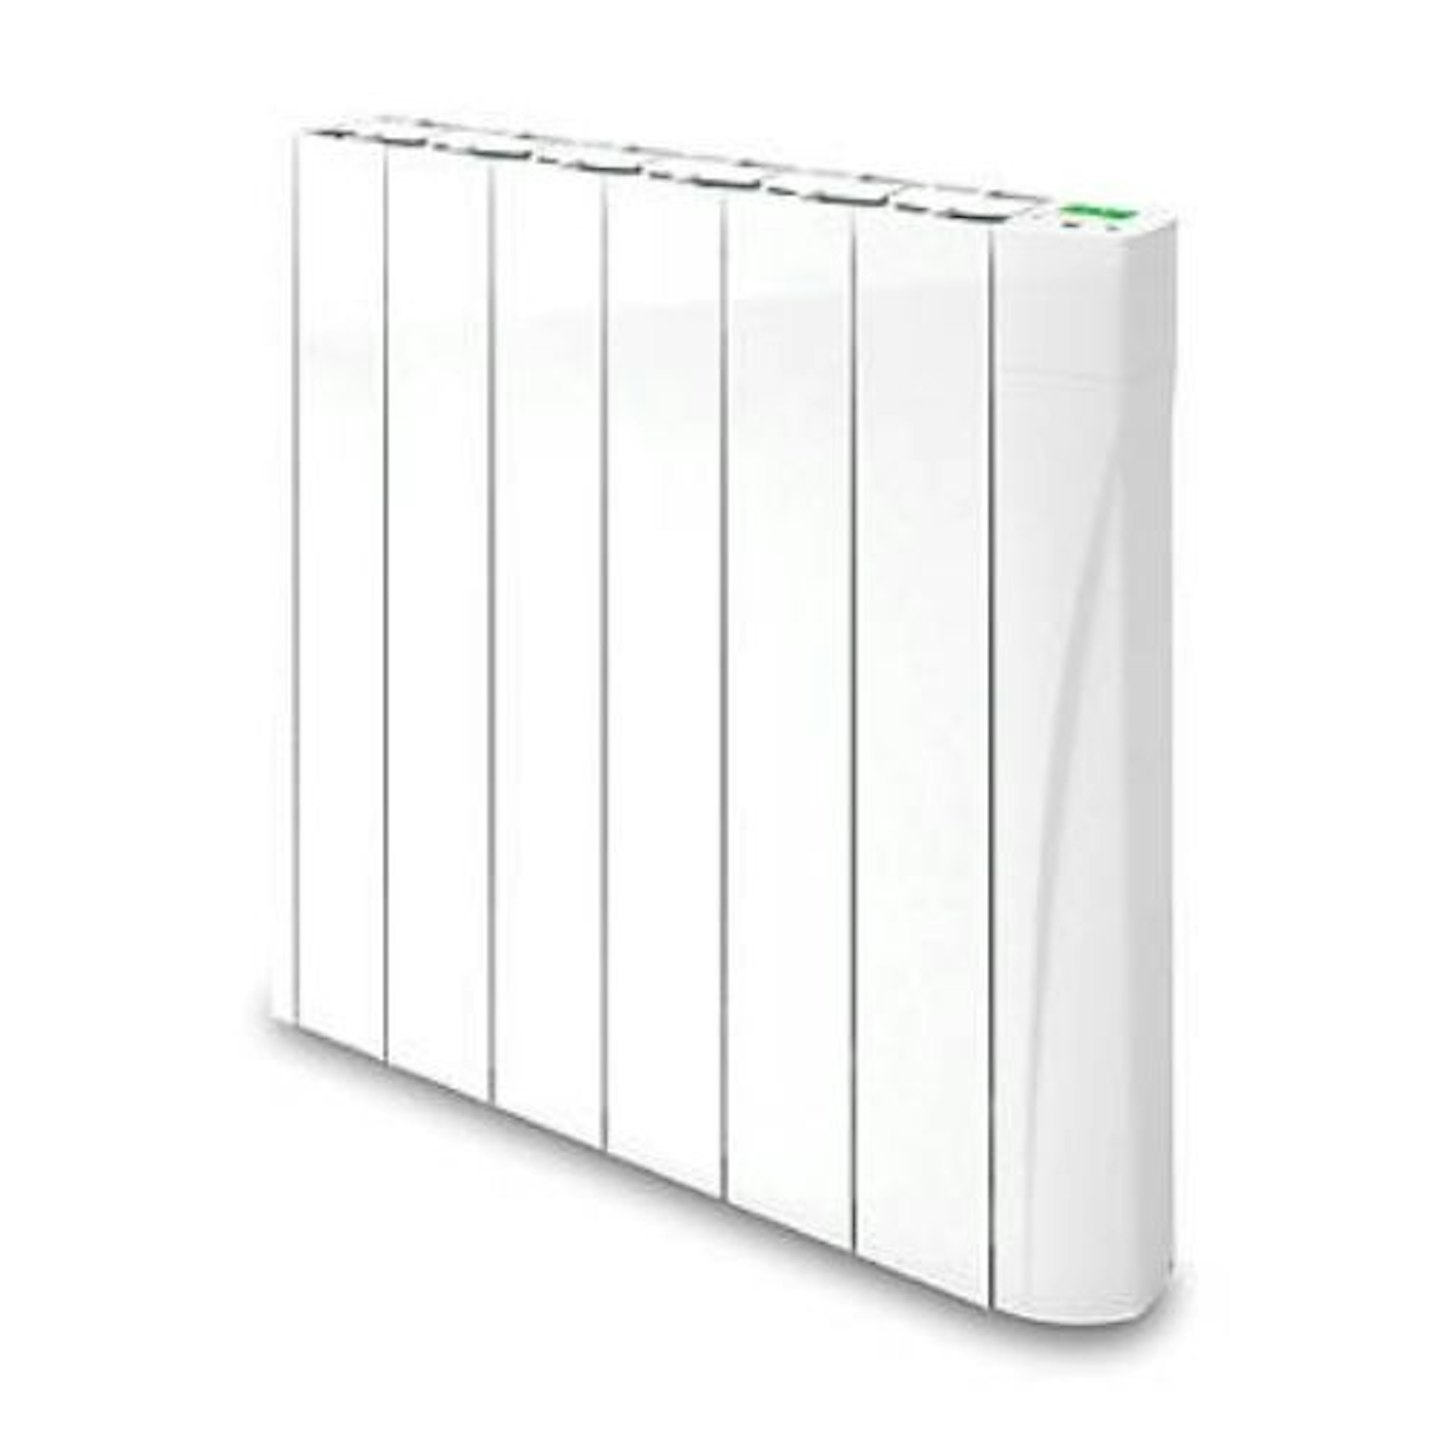 TCP Wall-mounted Smart Wi-fi Digital Oil-filled Electric Radiator in White